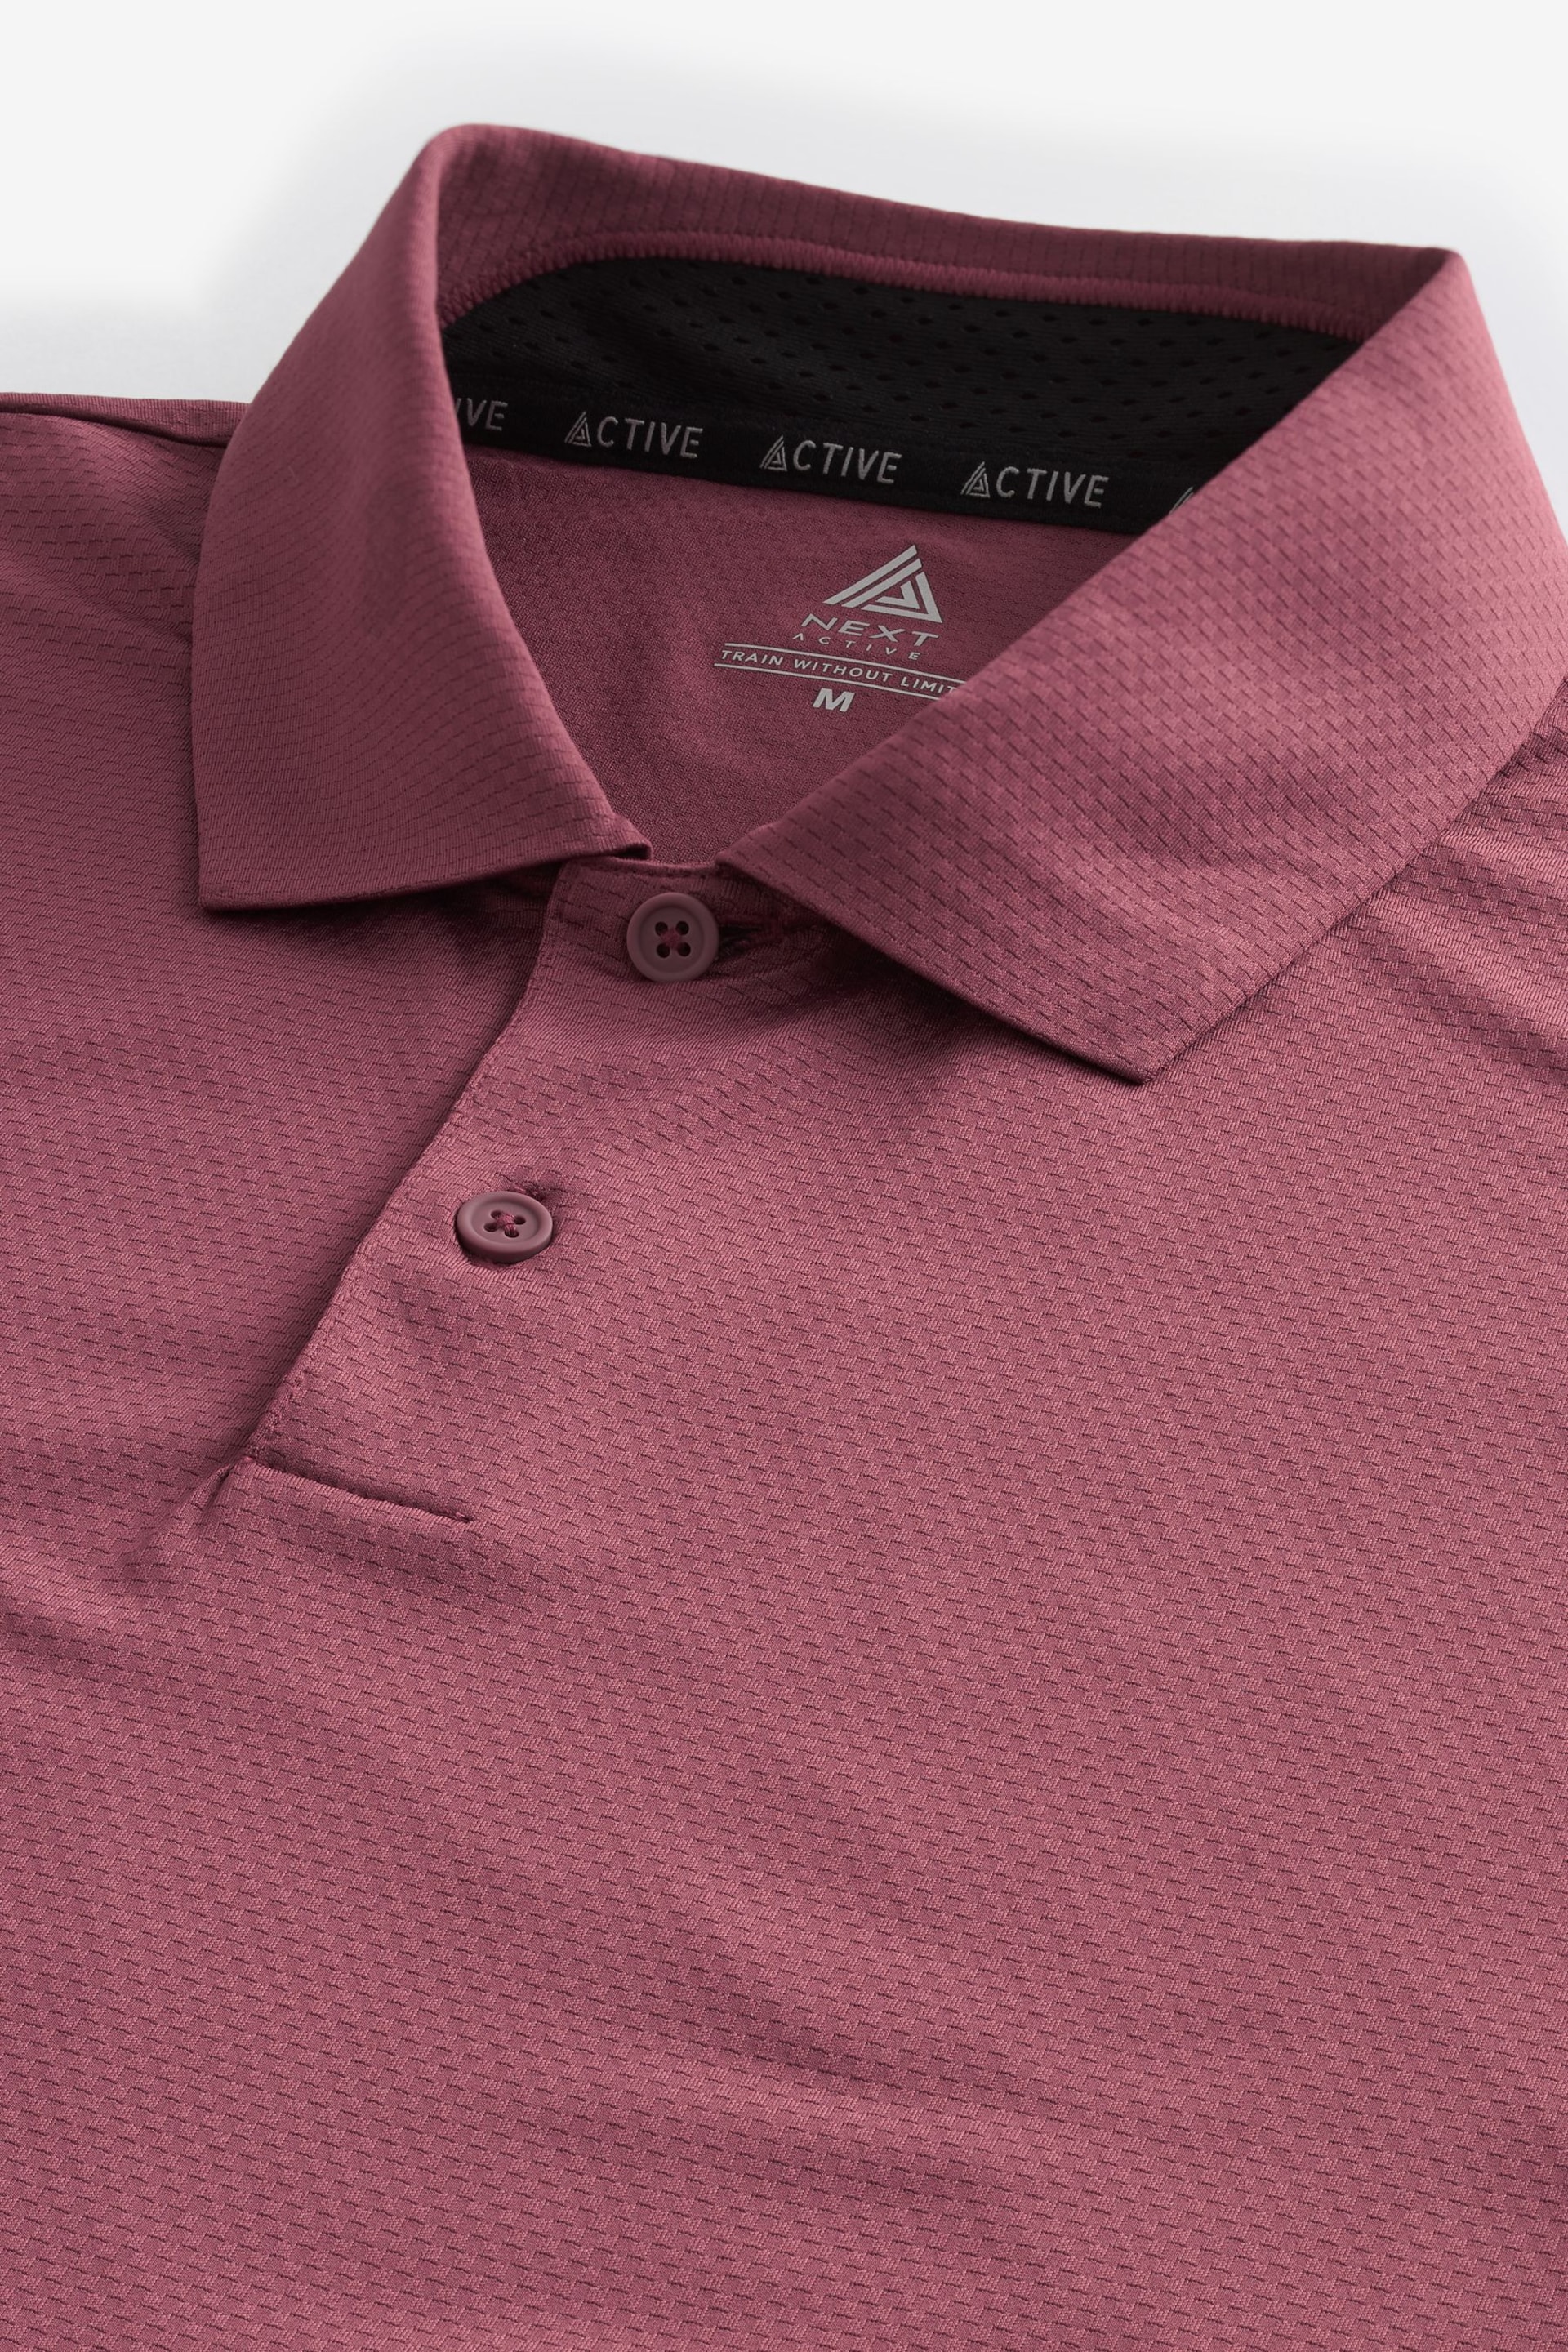 Pink Textured Golf Polo Shirt - Image 8 of 9